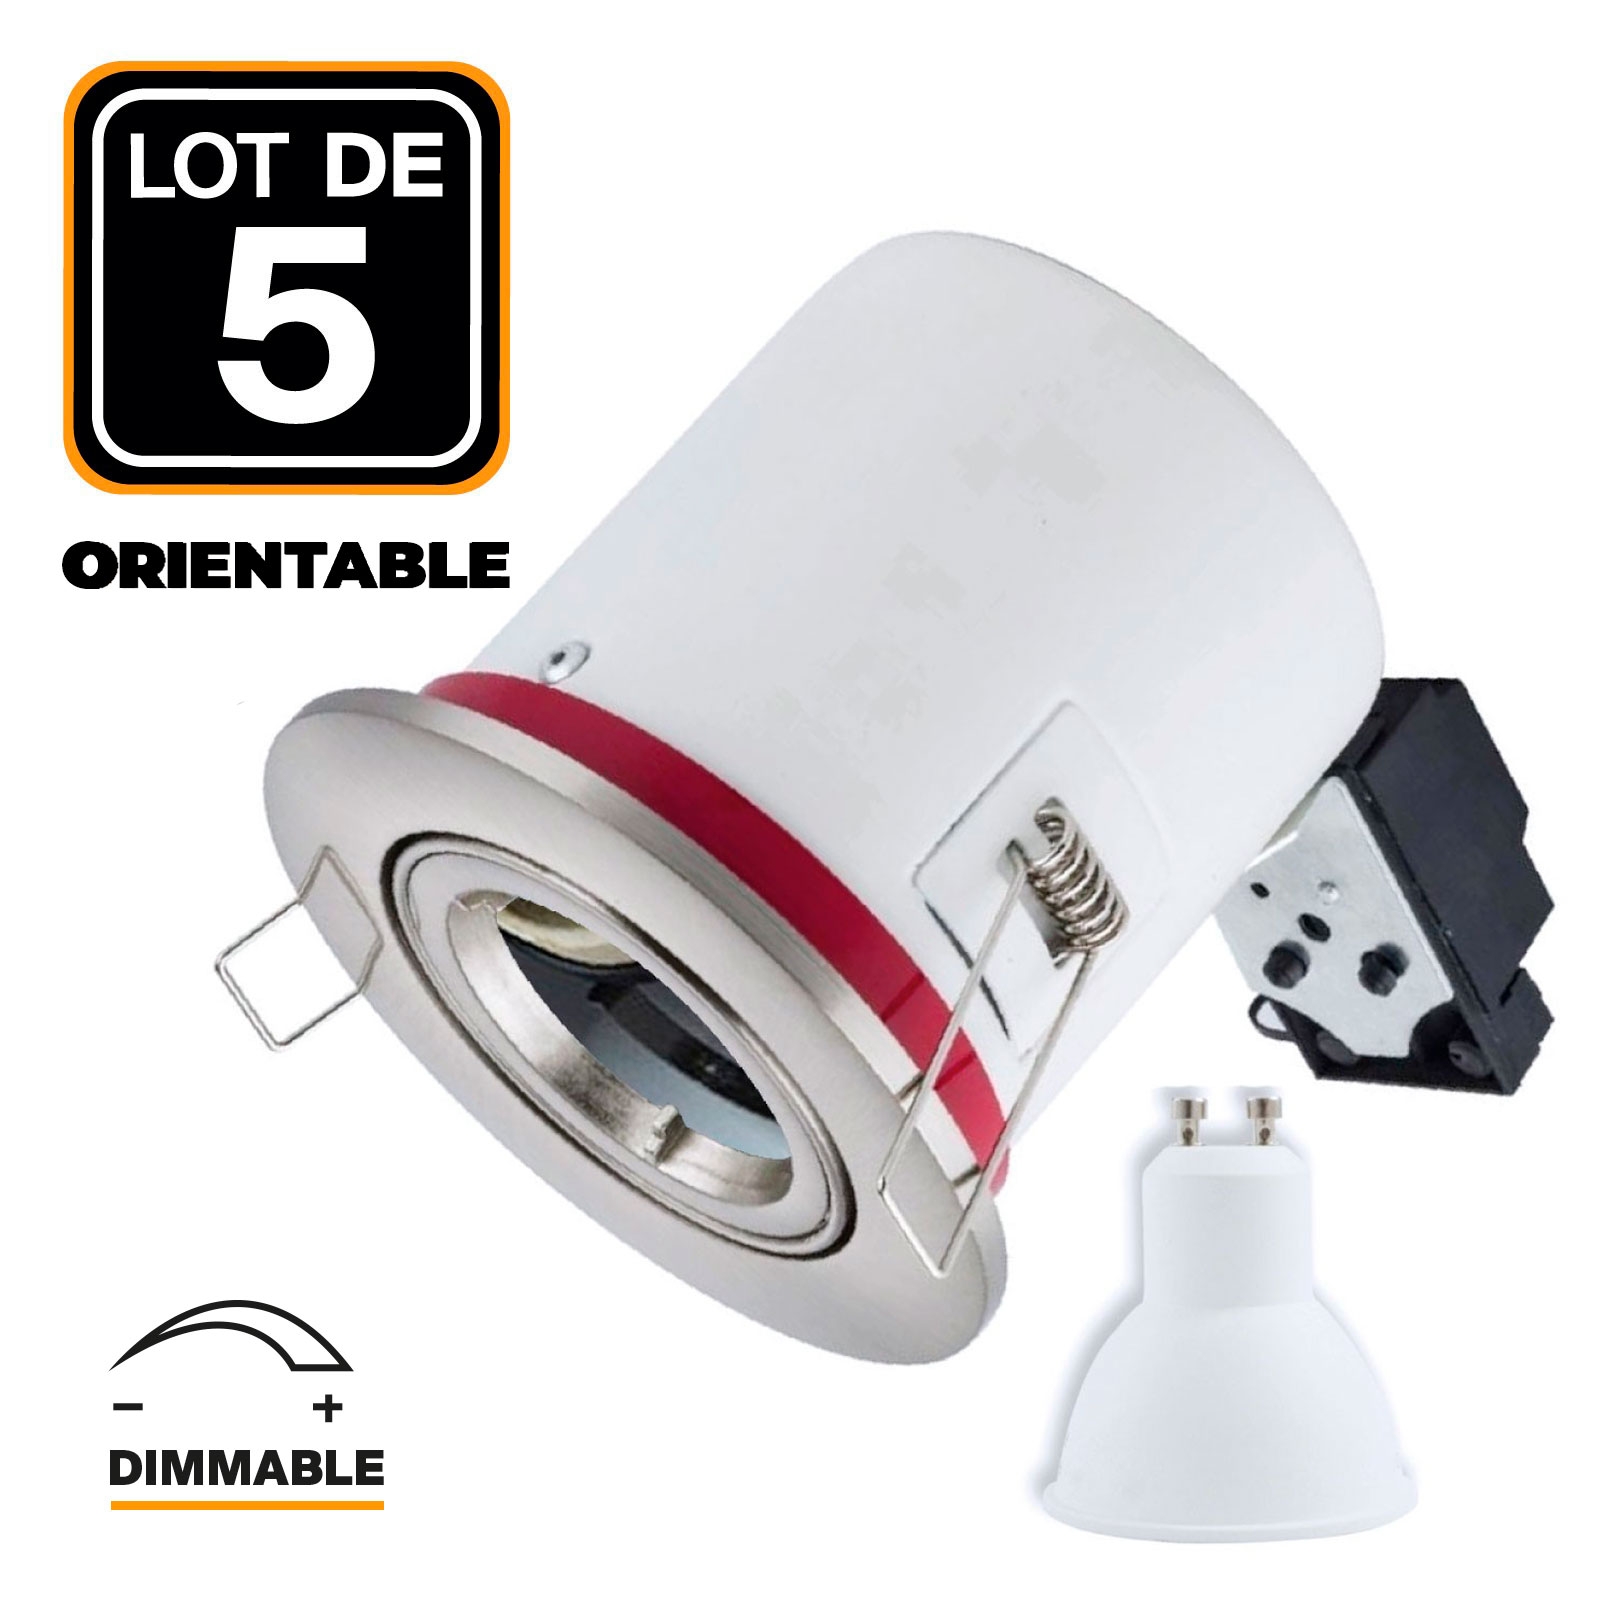 Lot 5 Supports Spots BBC INOX + Ampoule GU10 7W Blanc Chaud Dimmable + Douille